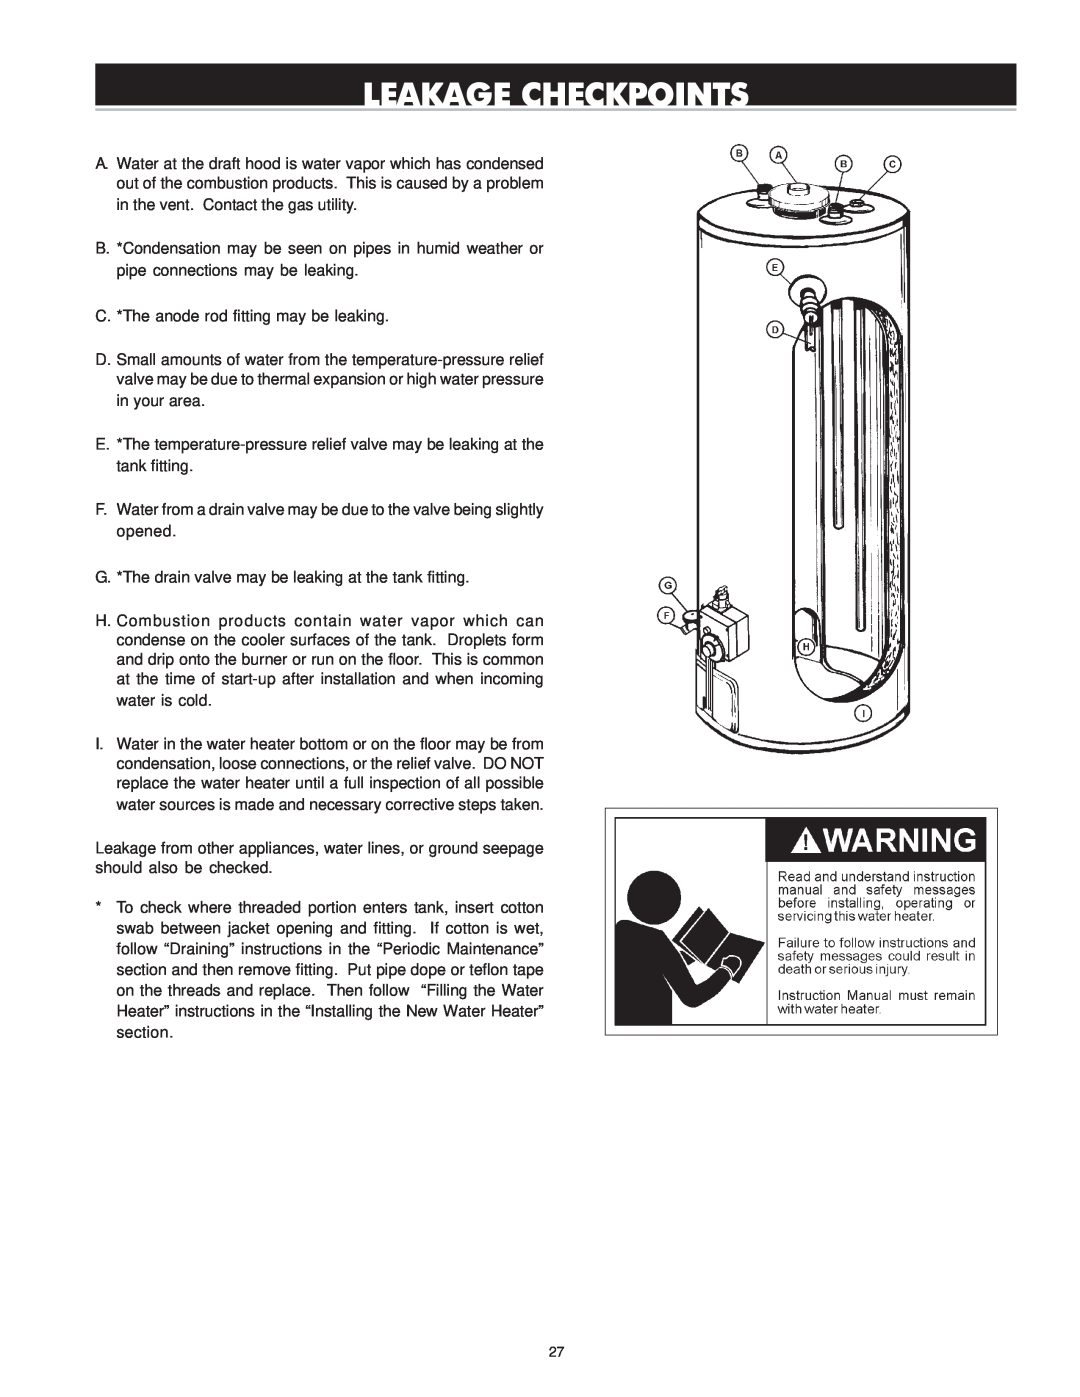 Reliance Water Heaters 606 Series, 196296-001 instruction manual Leakage Checkpoints 